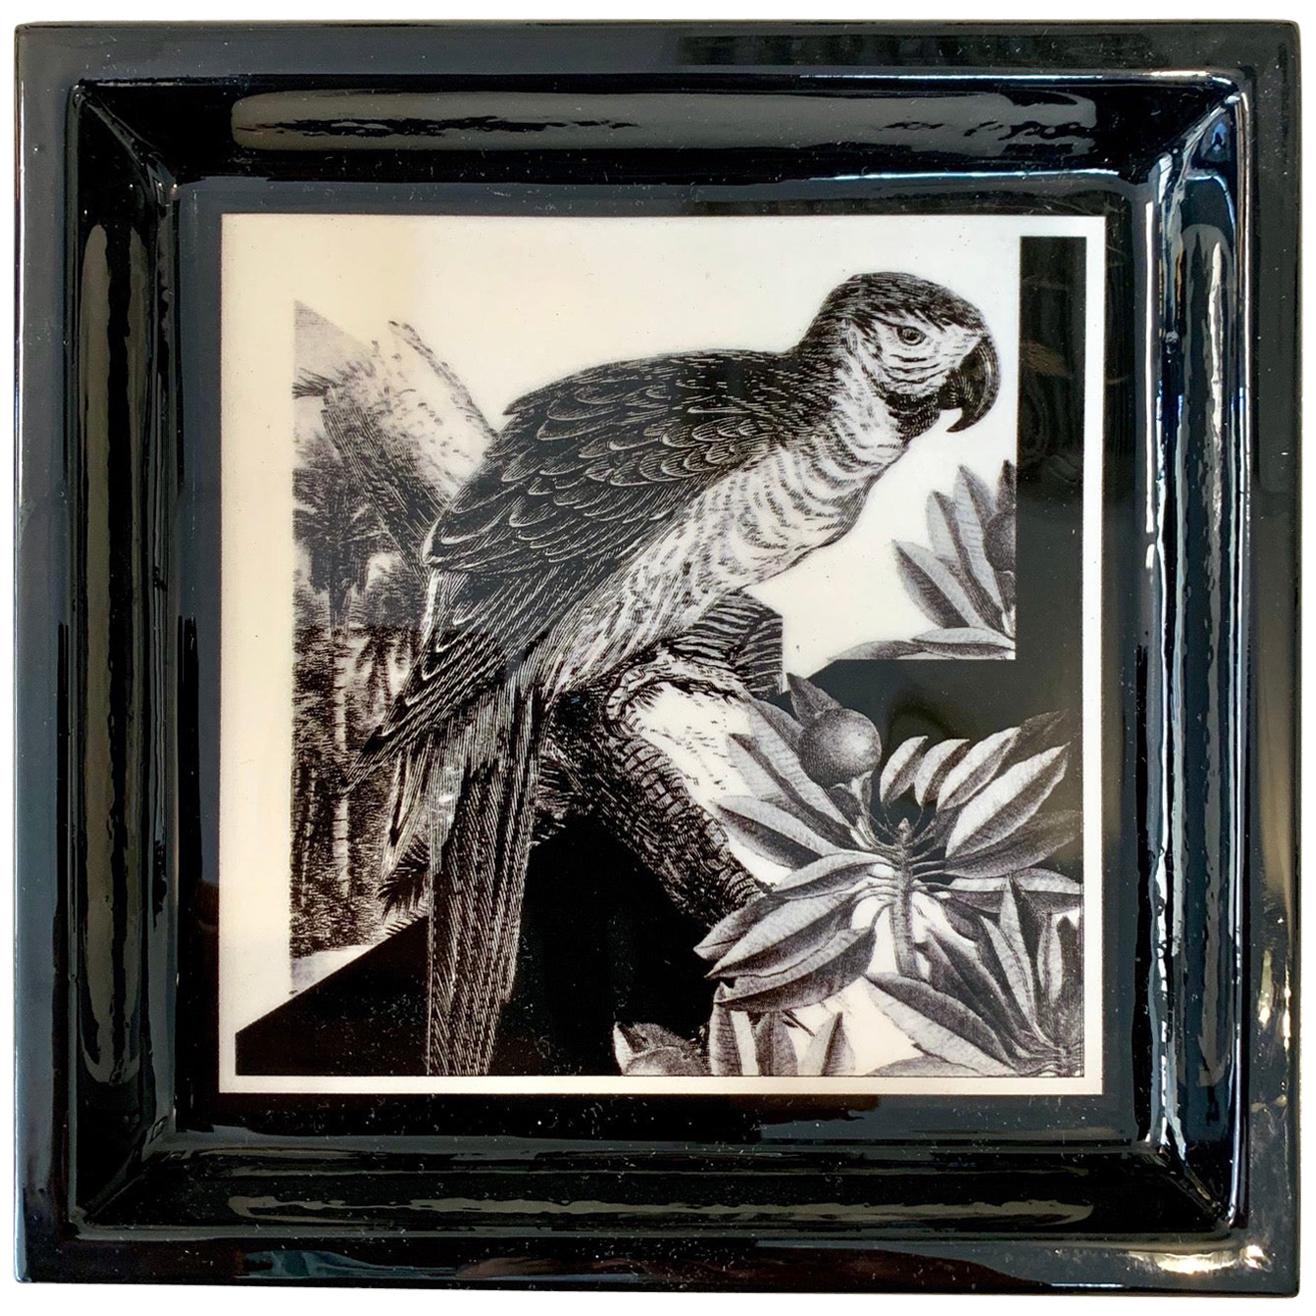 Italian Contemporary "Black and Wild" Collection Parrot Resin Pocket Tray